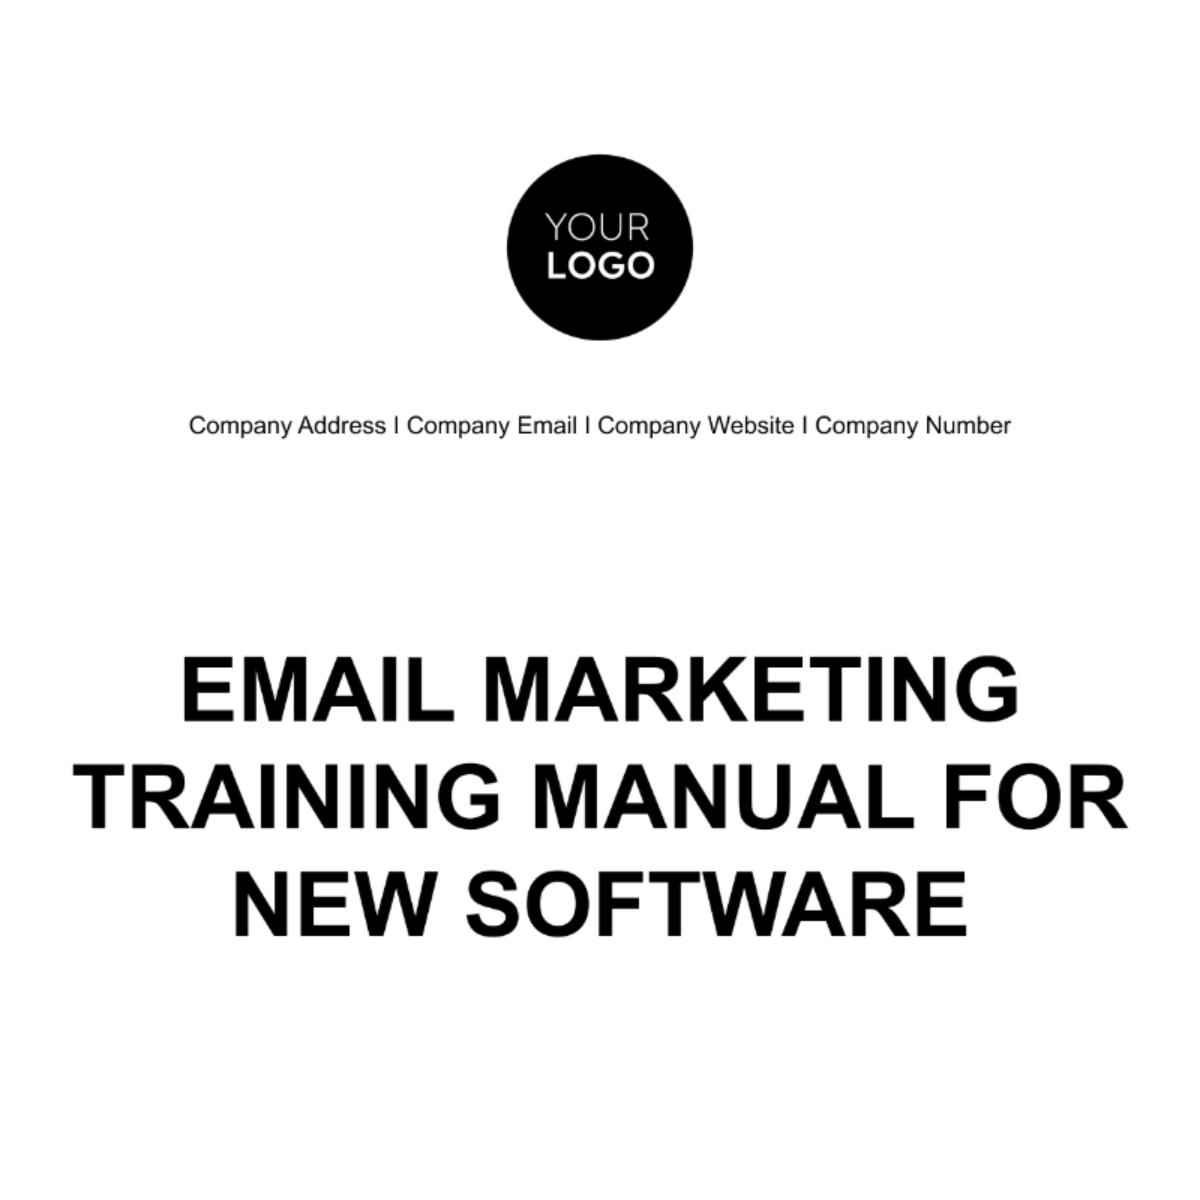 Free Email Marketing Training Manual for New Software Template